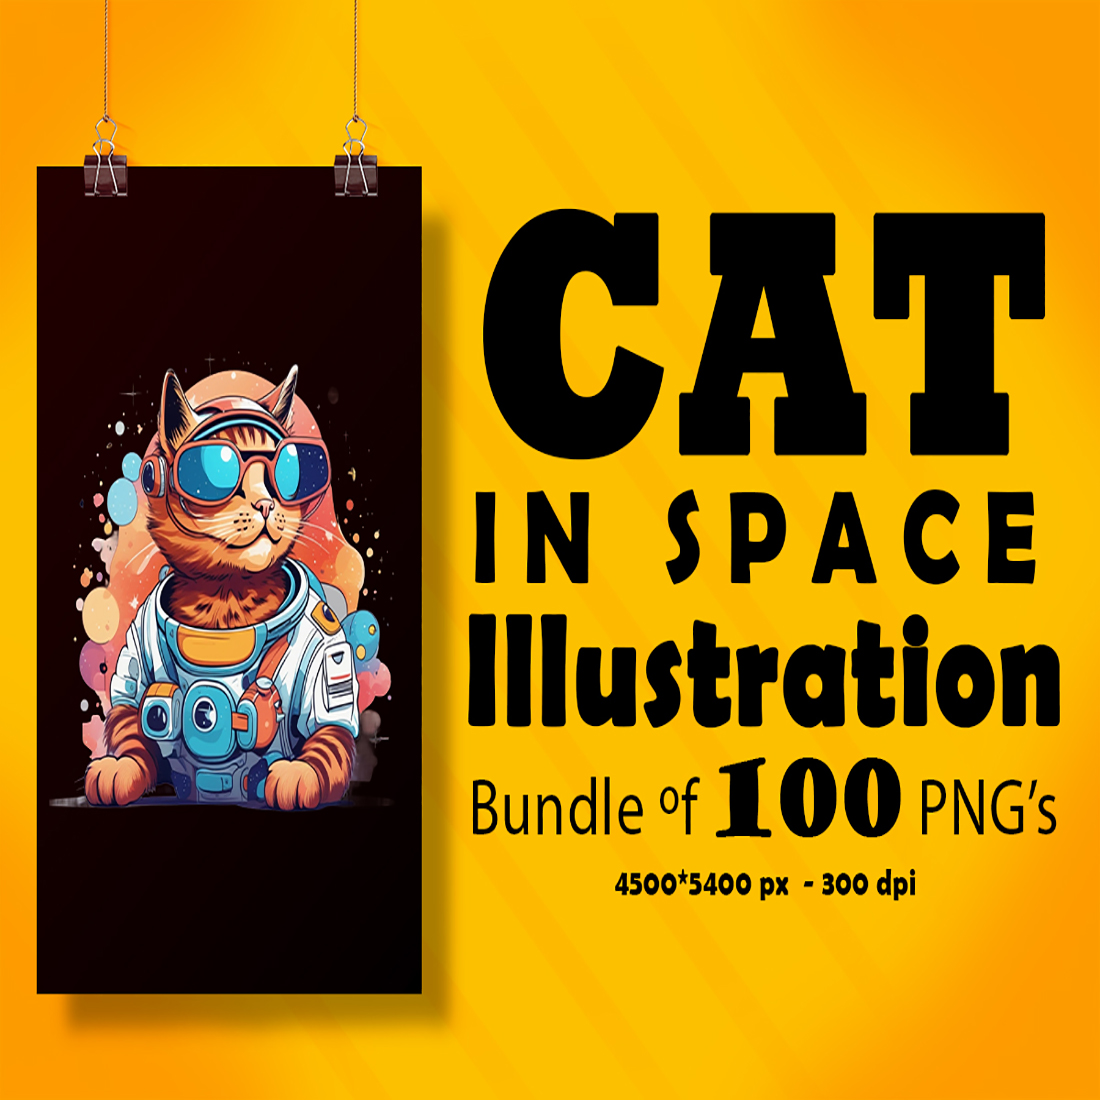 Cat in Space Illustration for POD 100 ClipArt's Bundle preview image.